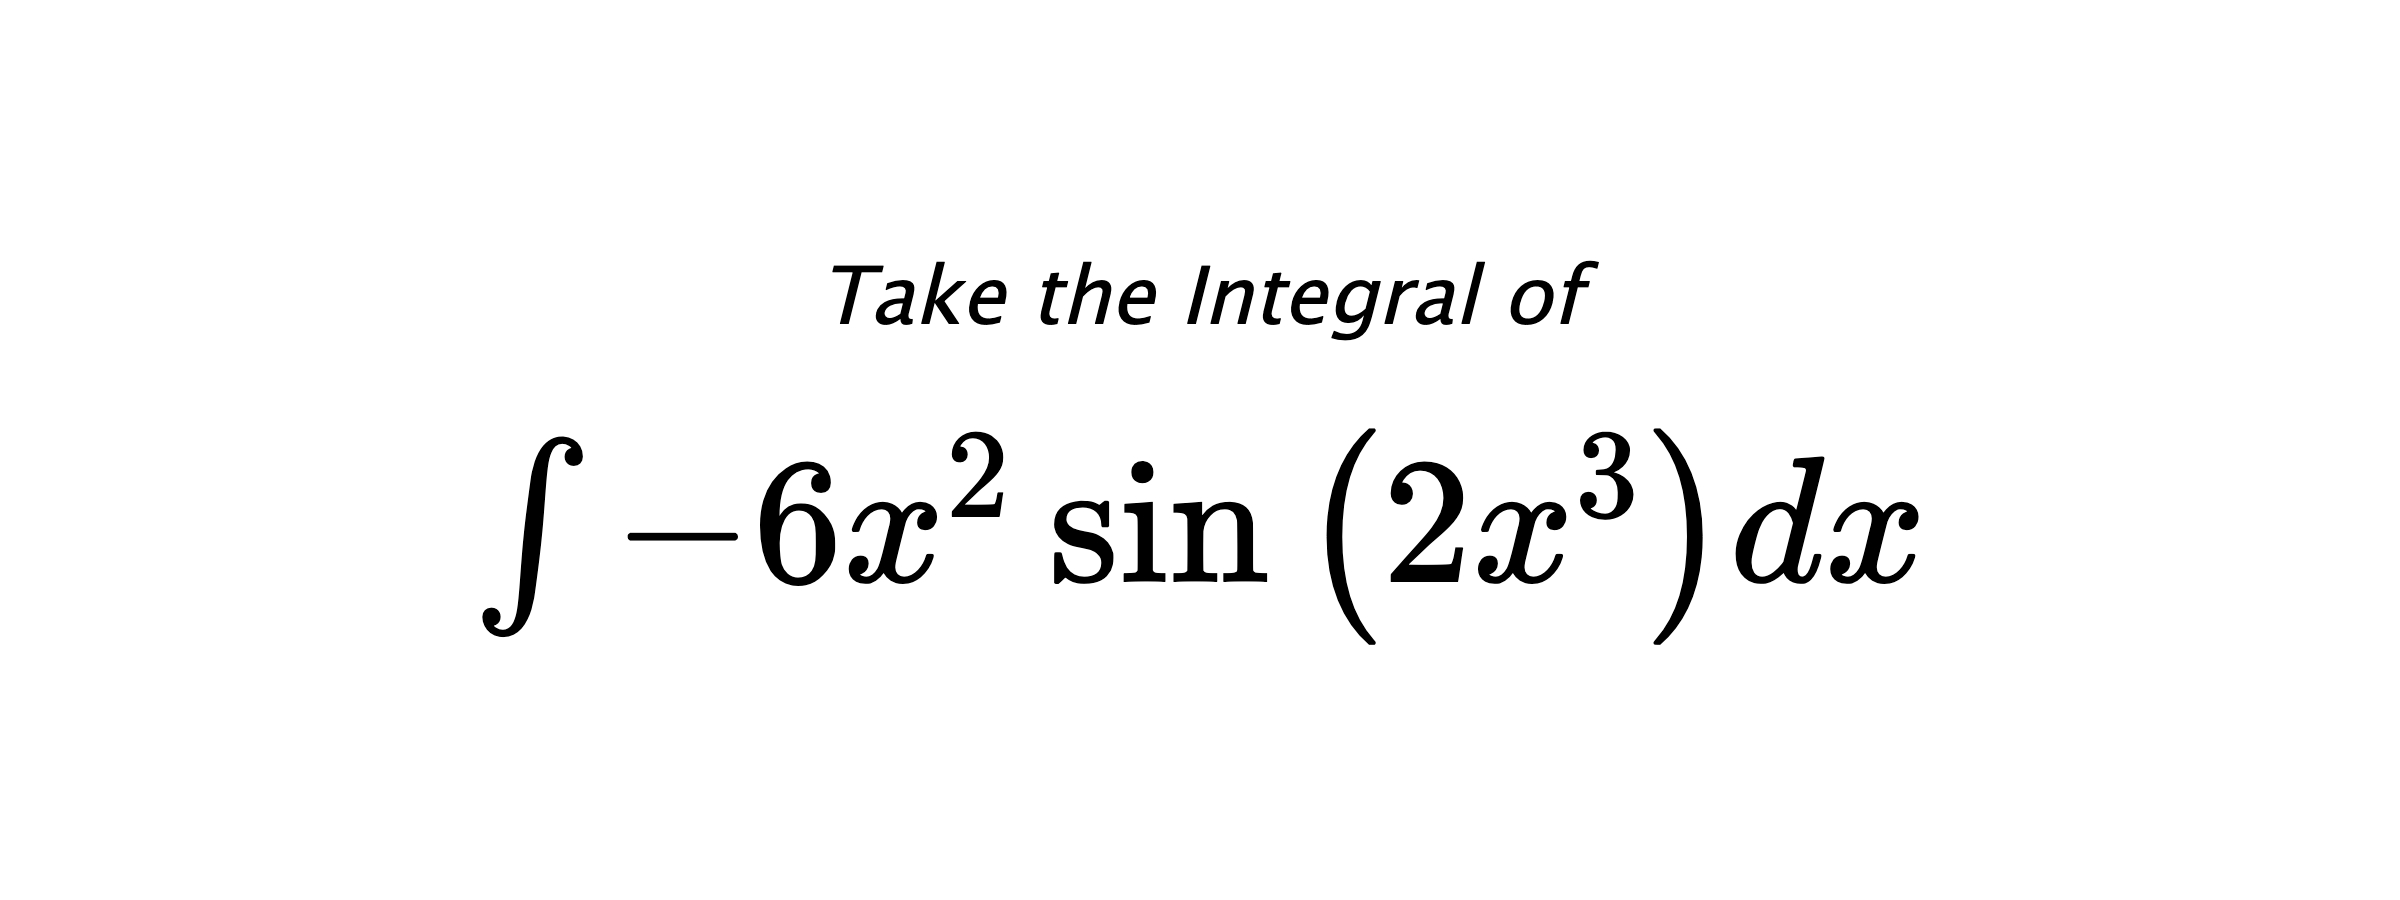 Take the Integral of $ \int - 6 x^{2} \sin{\left(2 x^{3} \right)} dx $